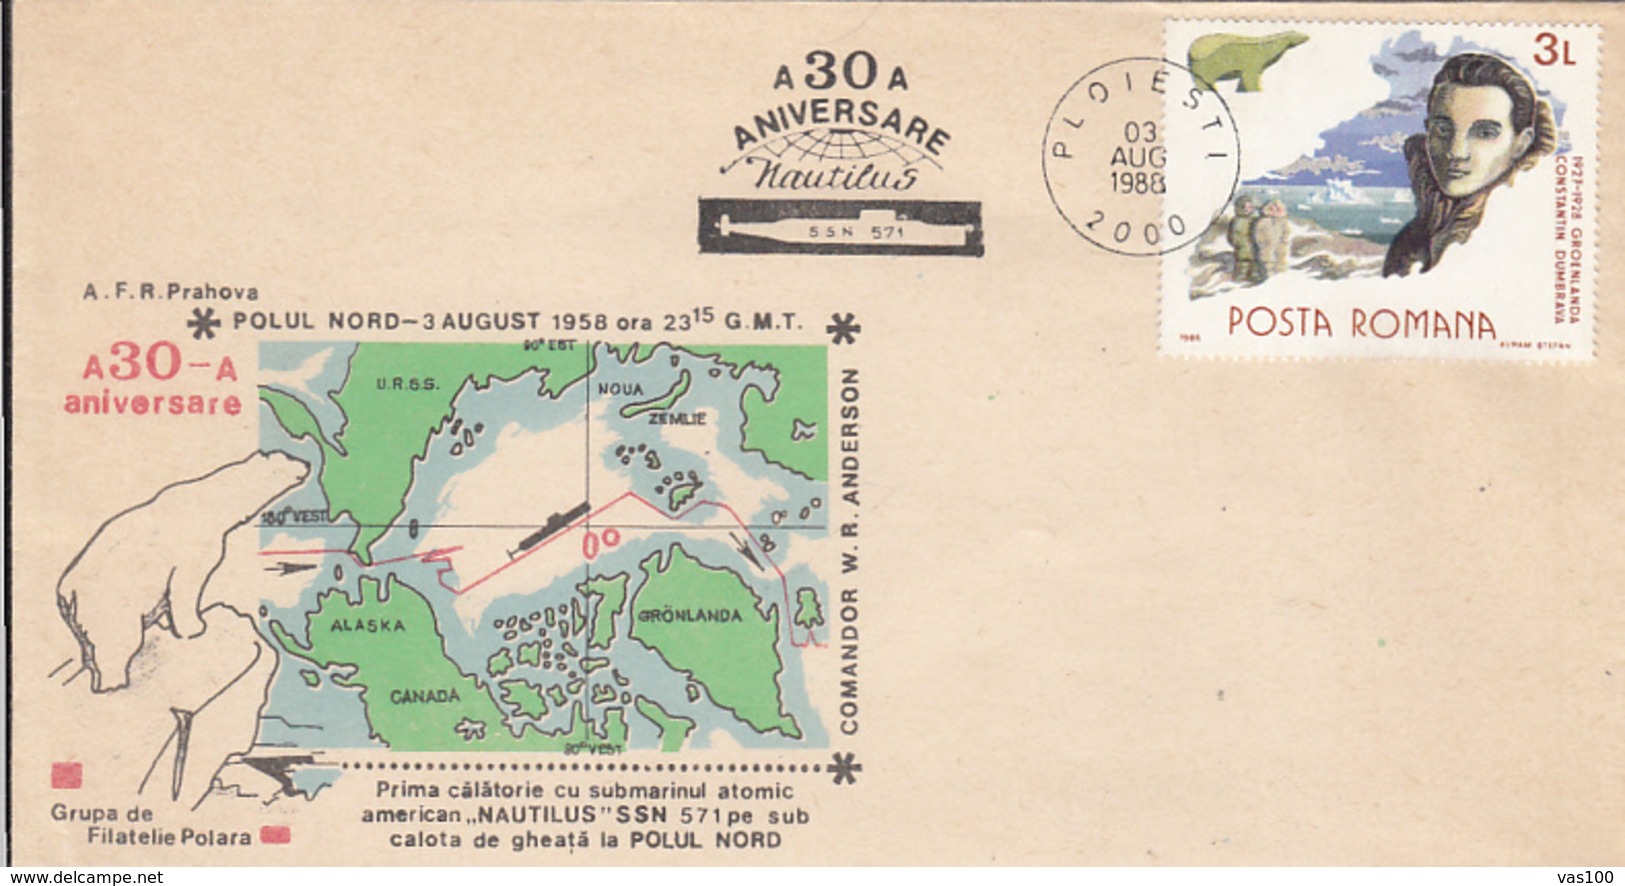 POLAR PHILATELY, NAUTILUS SUBMARINE'S FIRST ARCTIC EXPEDITION, SPECIAL COVER, 1988, ROMANIA - Other Means Of Transport